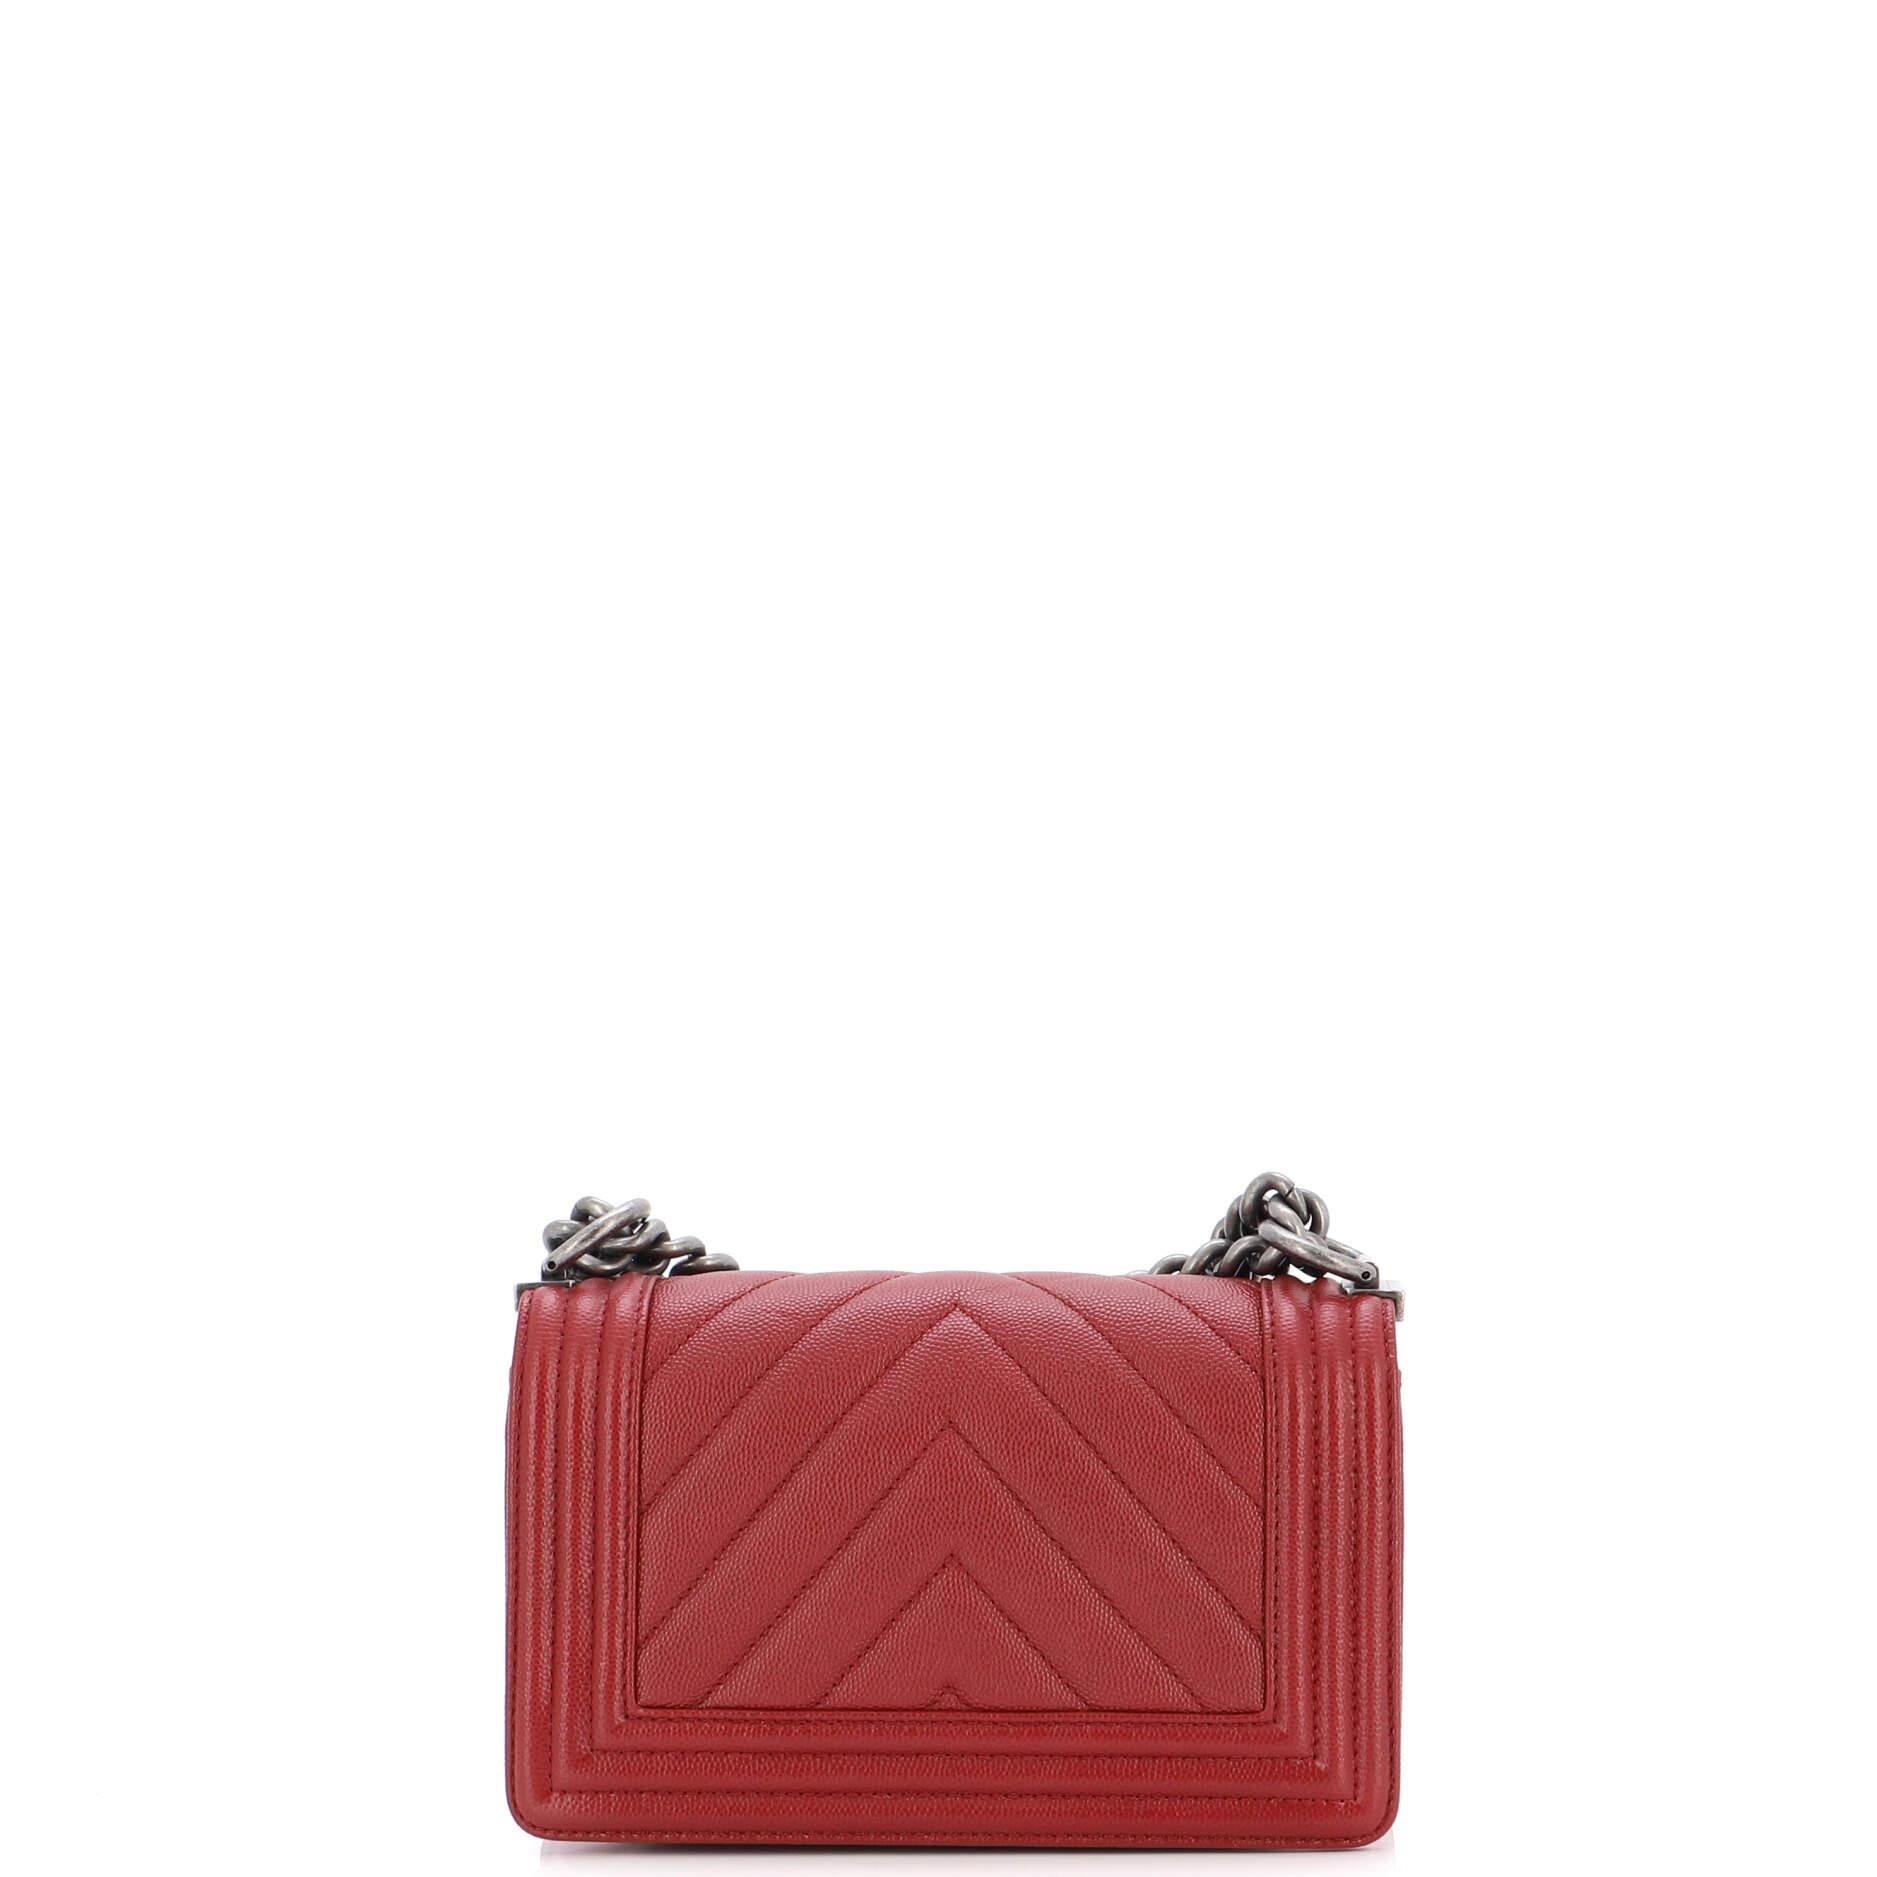 Chanel Boy Flap Bag Chevron Caviar Small In Good Condition For Sale In NY, NY